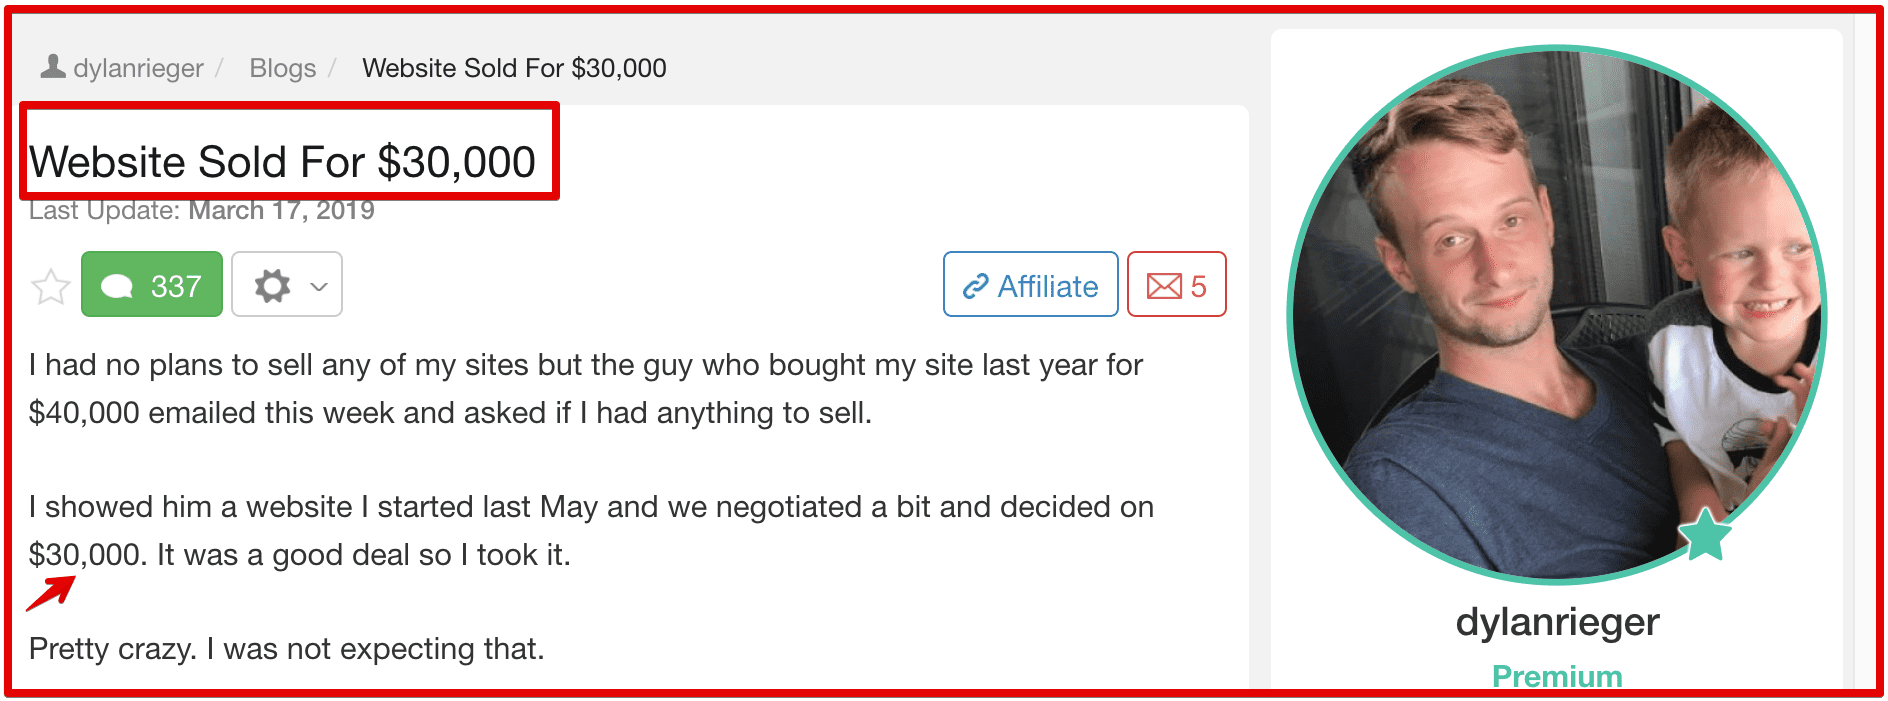 Dylan Success story on Wealthy Affiliate